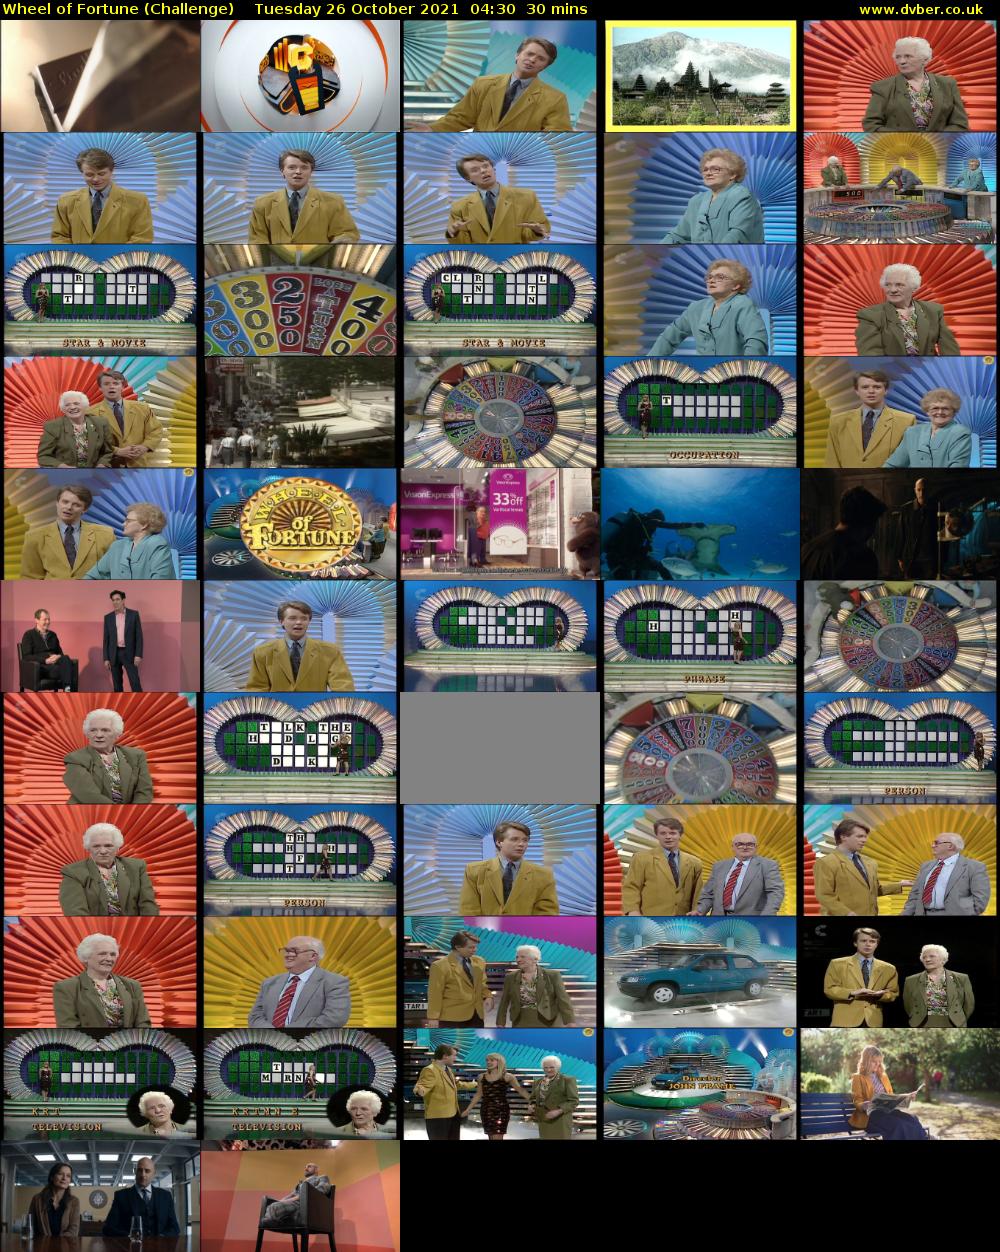 Wheel of Fortune (Challenge) Tuesday 26 October 2021 04:30 - 05:00